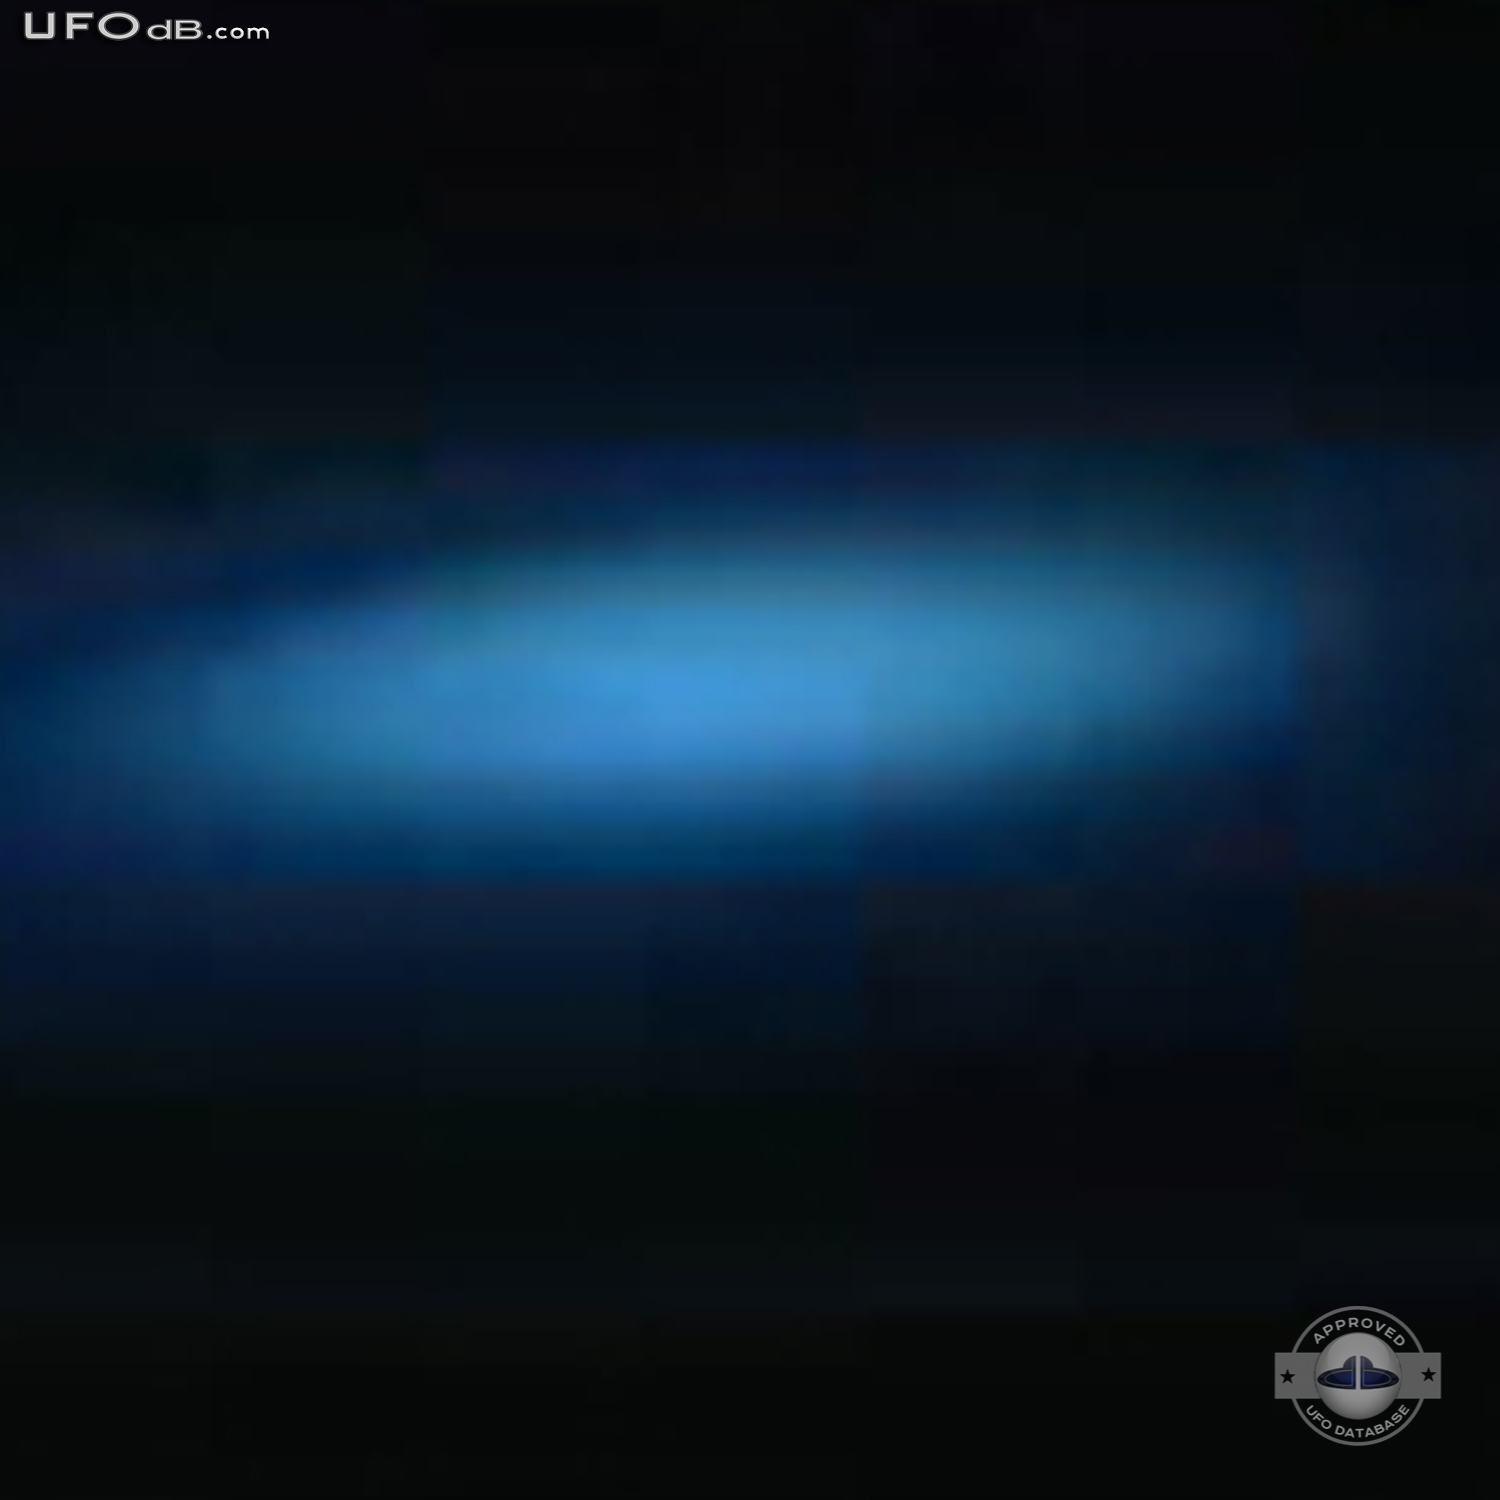 Christchurch New Zealand | Blue Glowing UFO on Picture | March 29 2011 UFO Picture #302-6